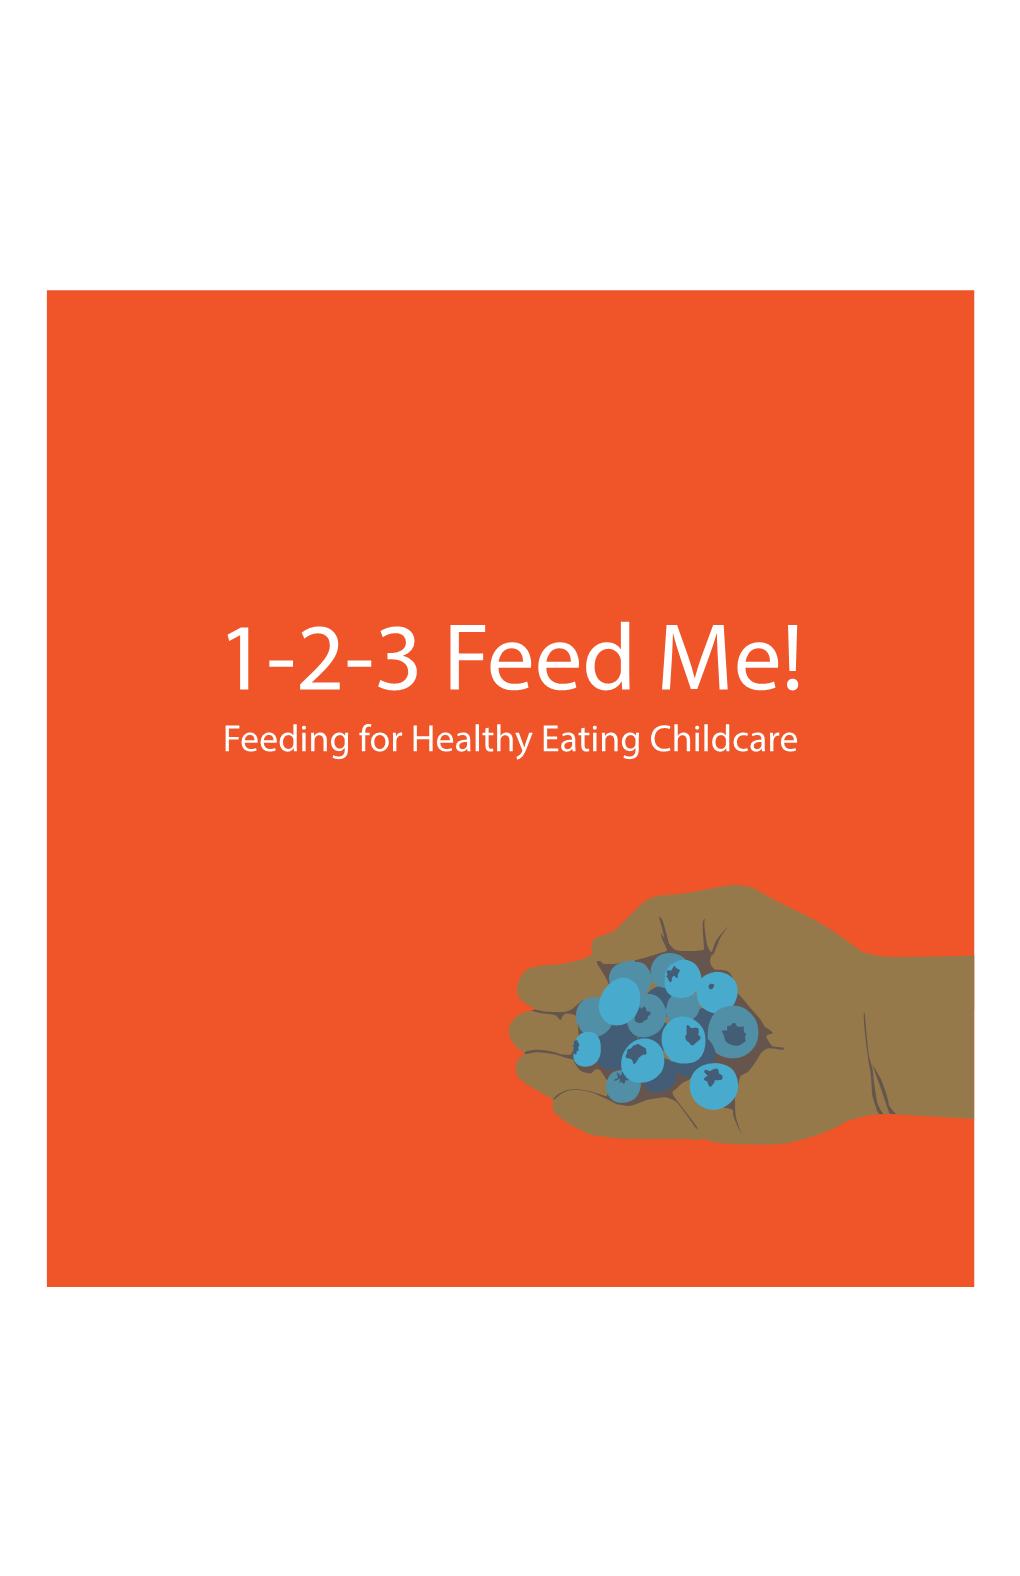 Feeding for Healthy Eating Childcare 1-2-3 Feed Me! Feeding for Healthy Eating Childcare